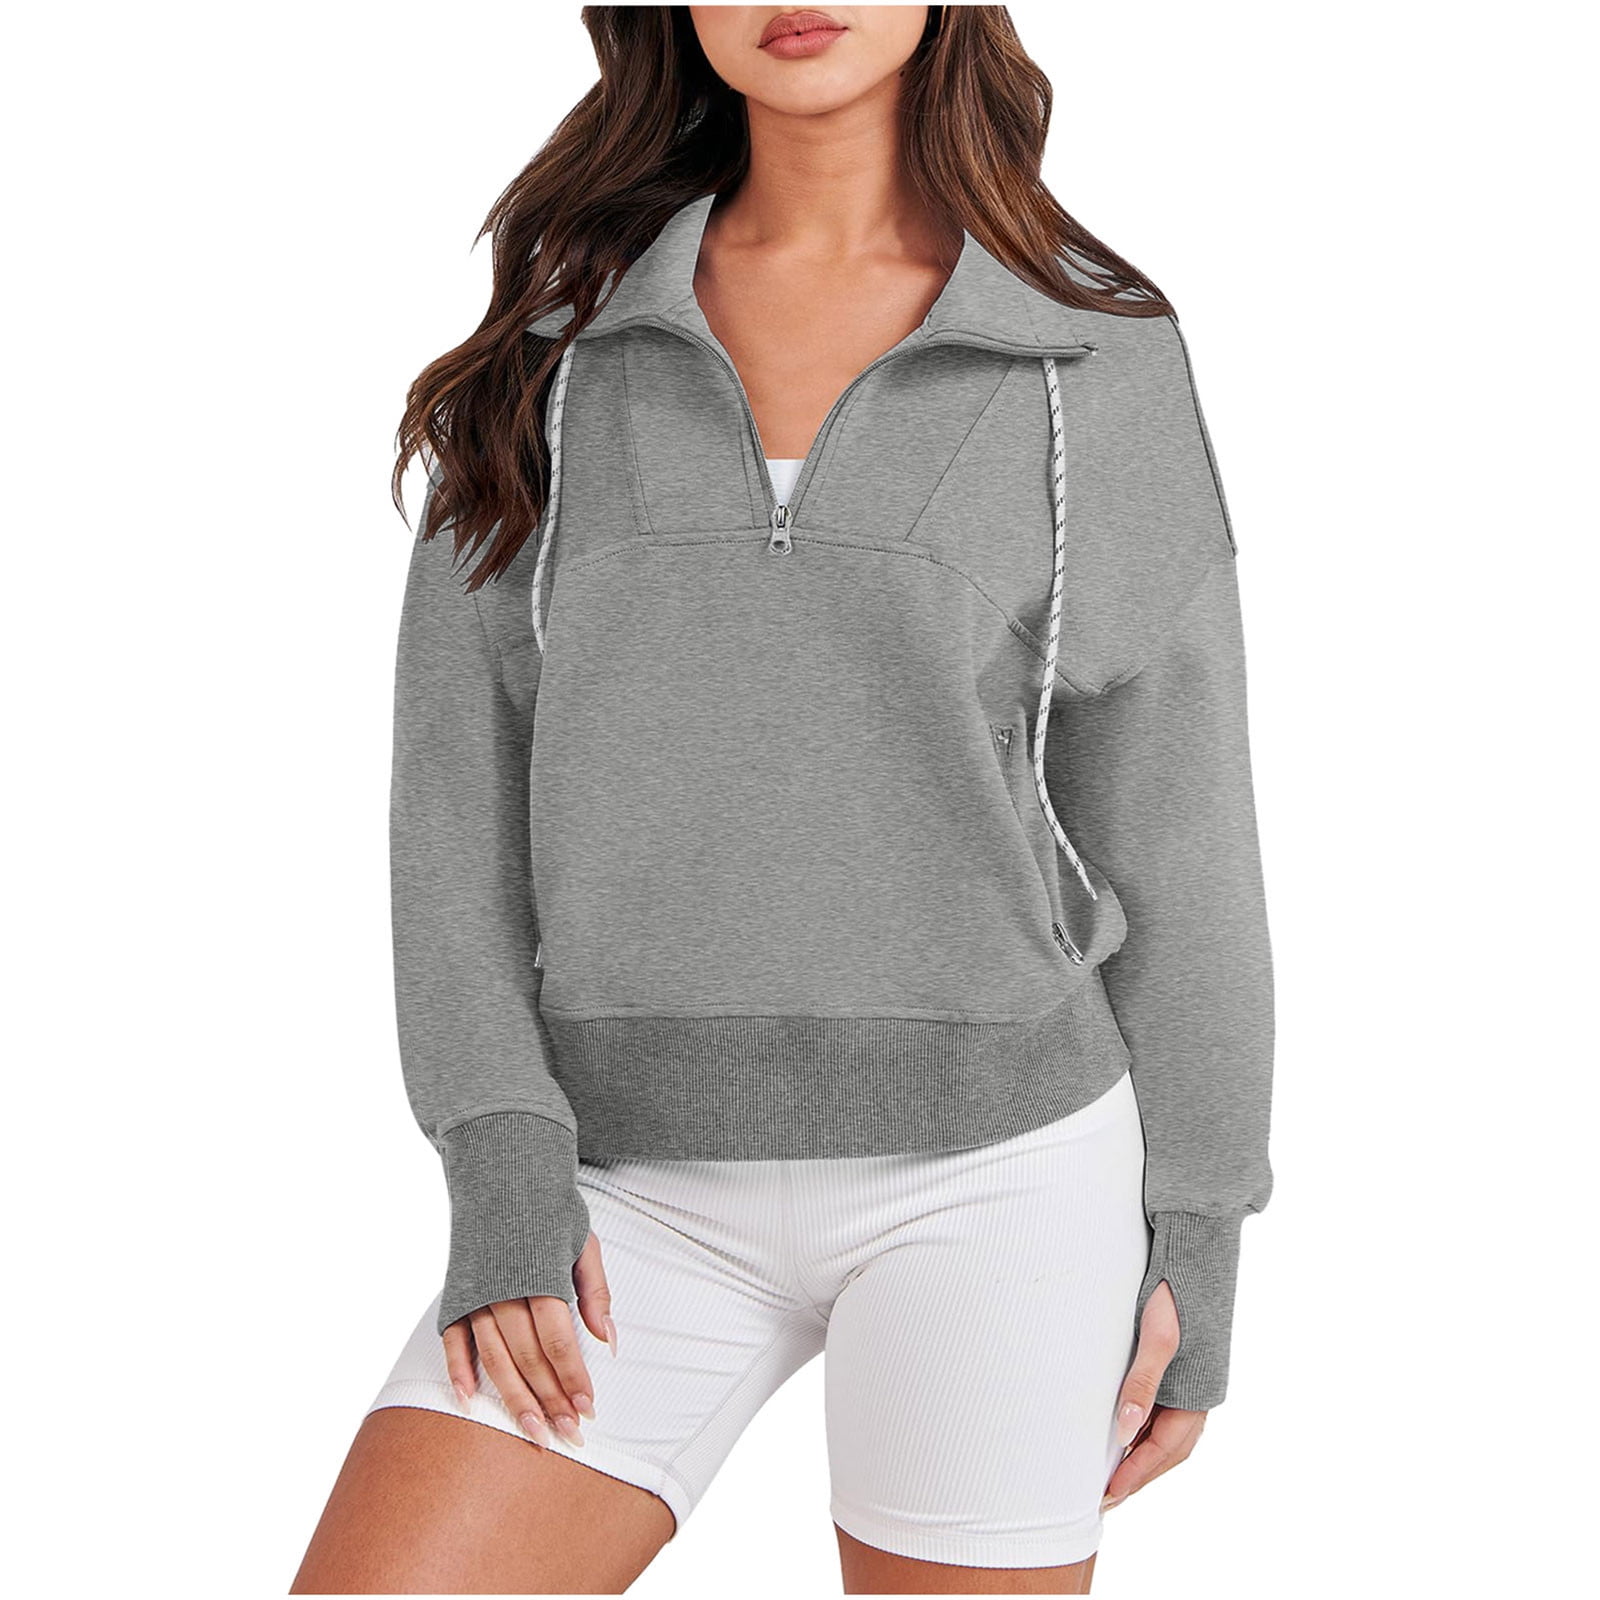 warehouse sale clearance Sweatshirts for Women Loose Fit